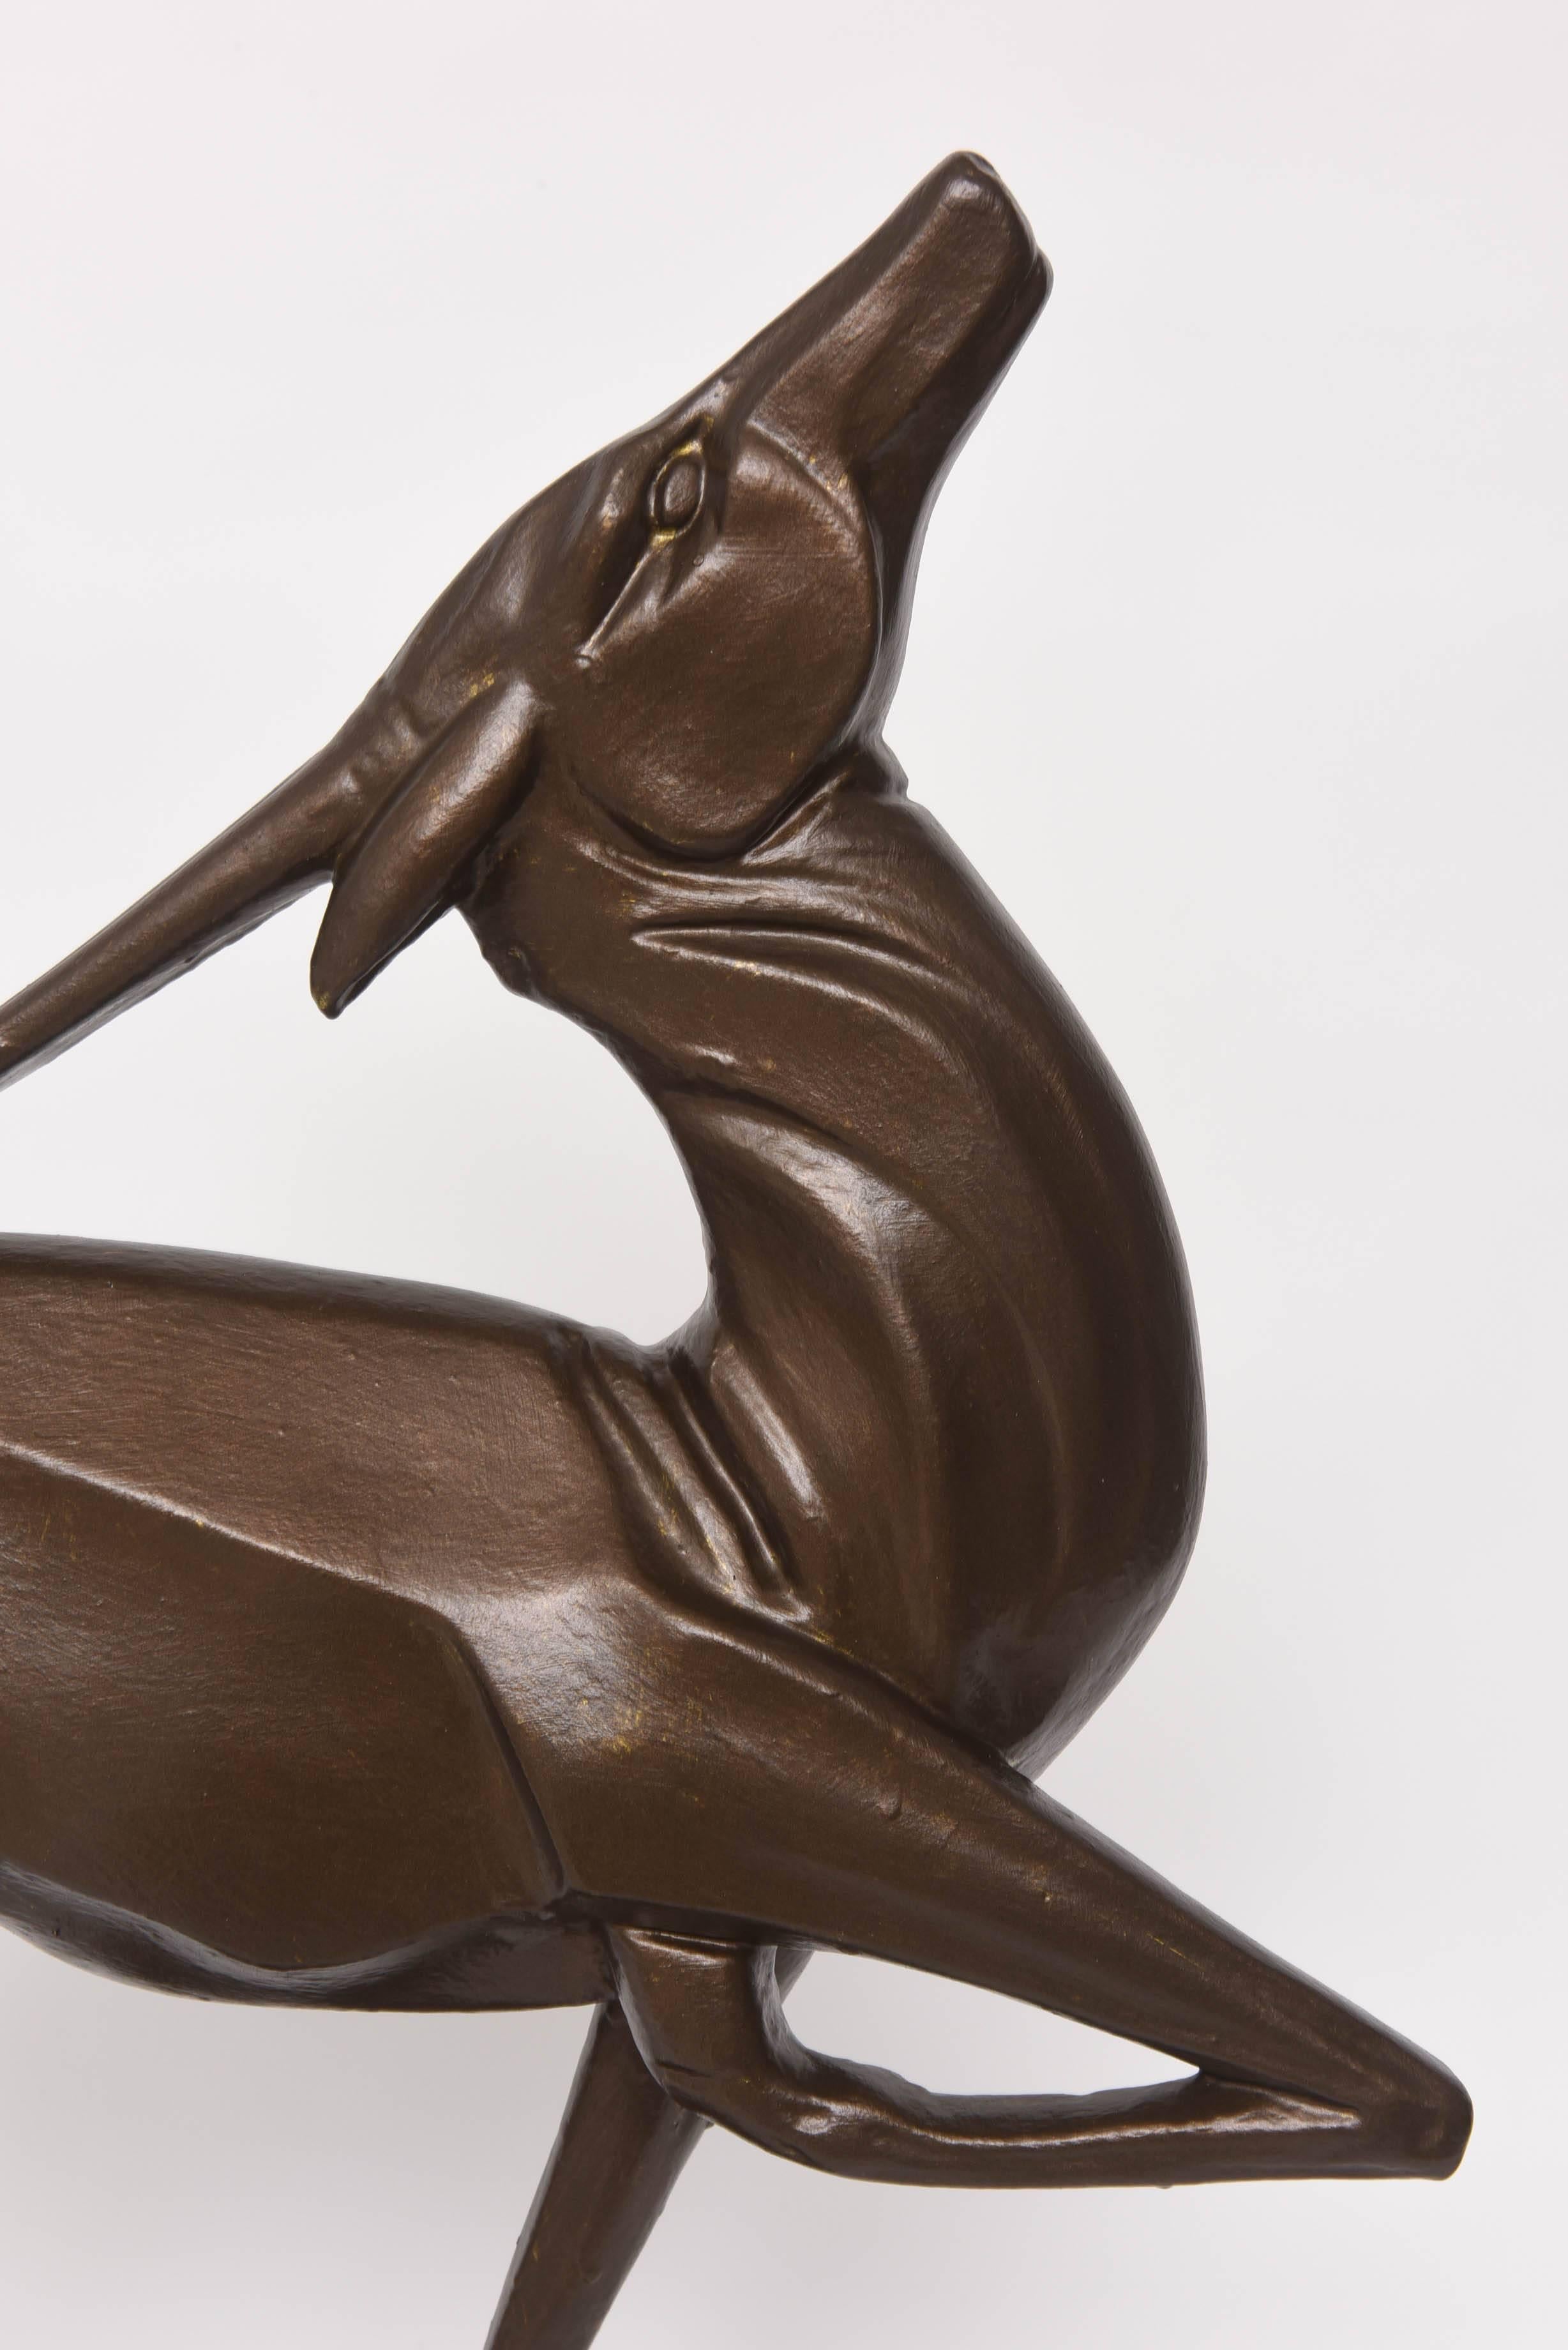 This American Art Deco sculpture is from the 1930s and will make the perfect statement piece. The gazelle with is angular form and patinated faux-bronze finish plays beautifully with the light giving the piece movement and grace.

